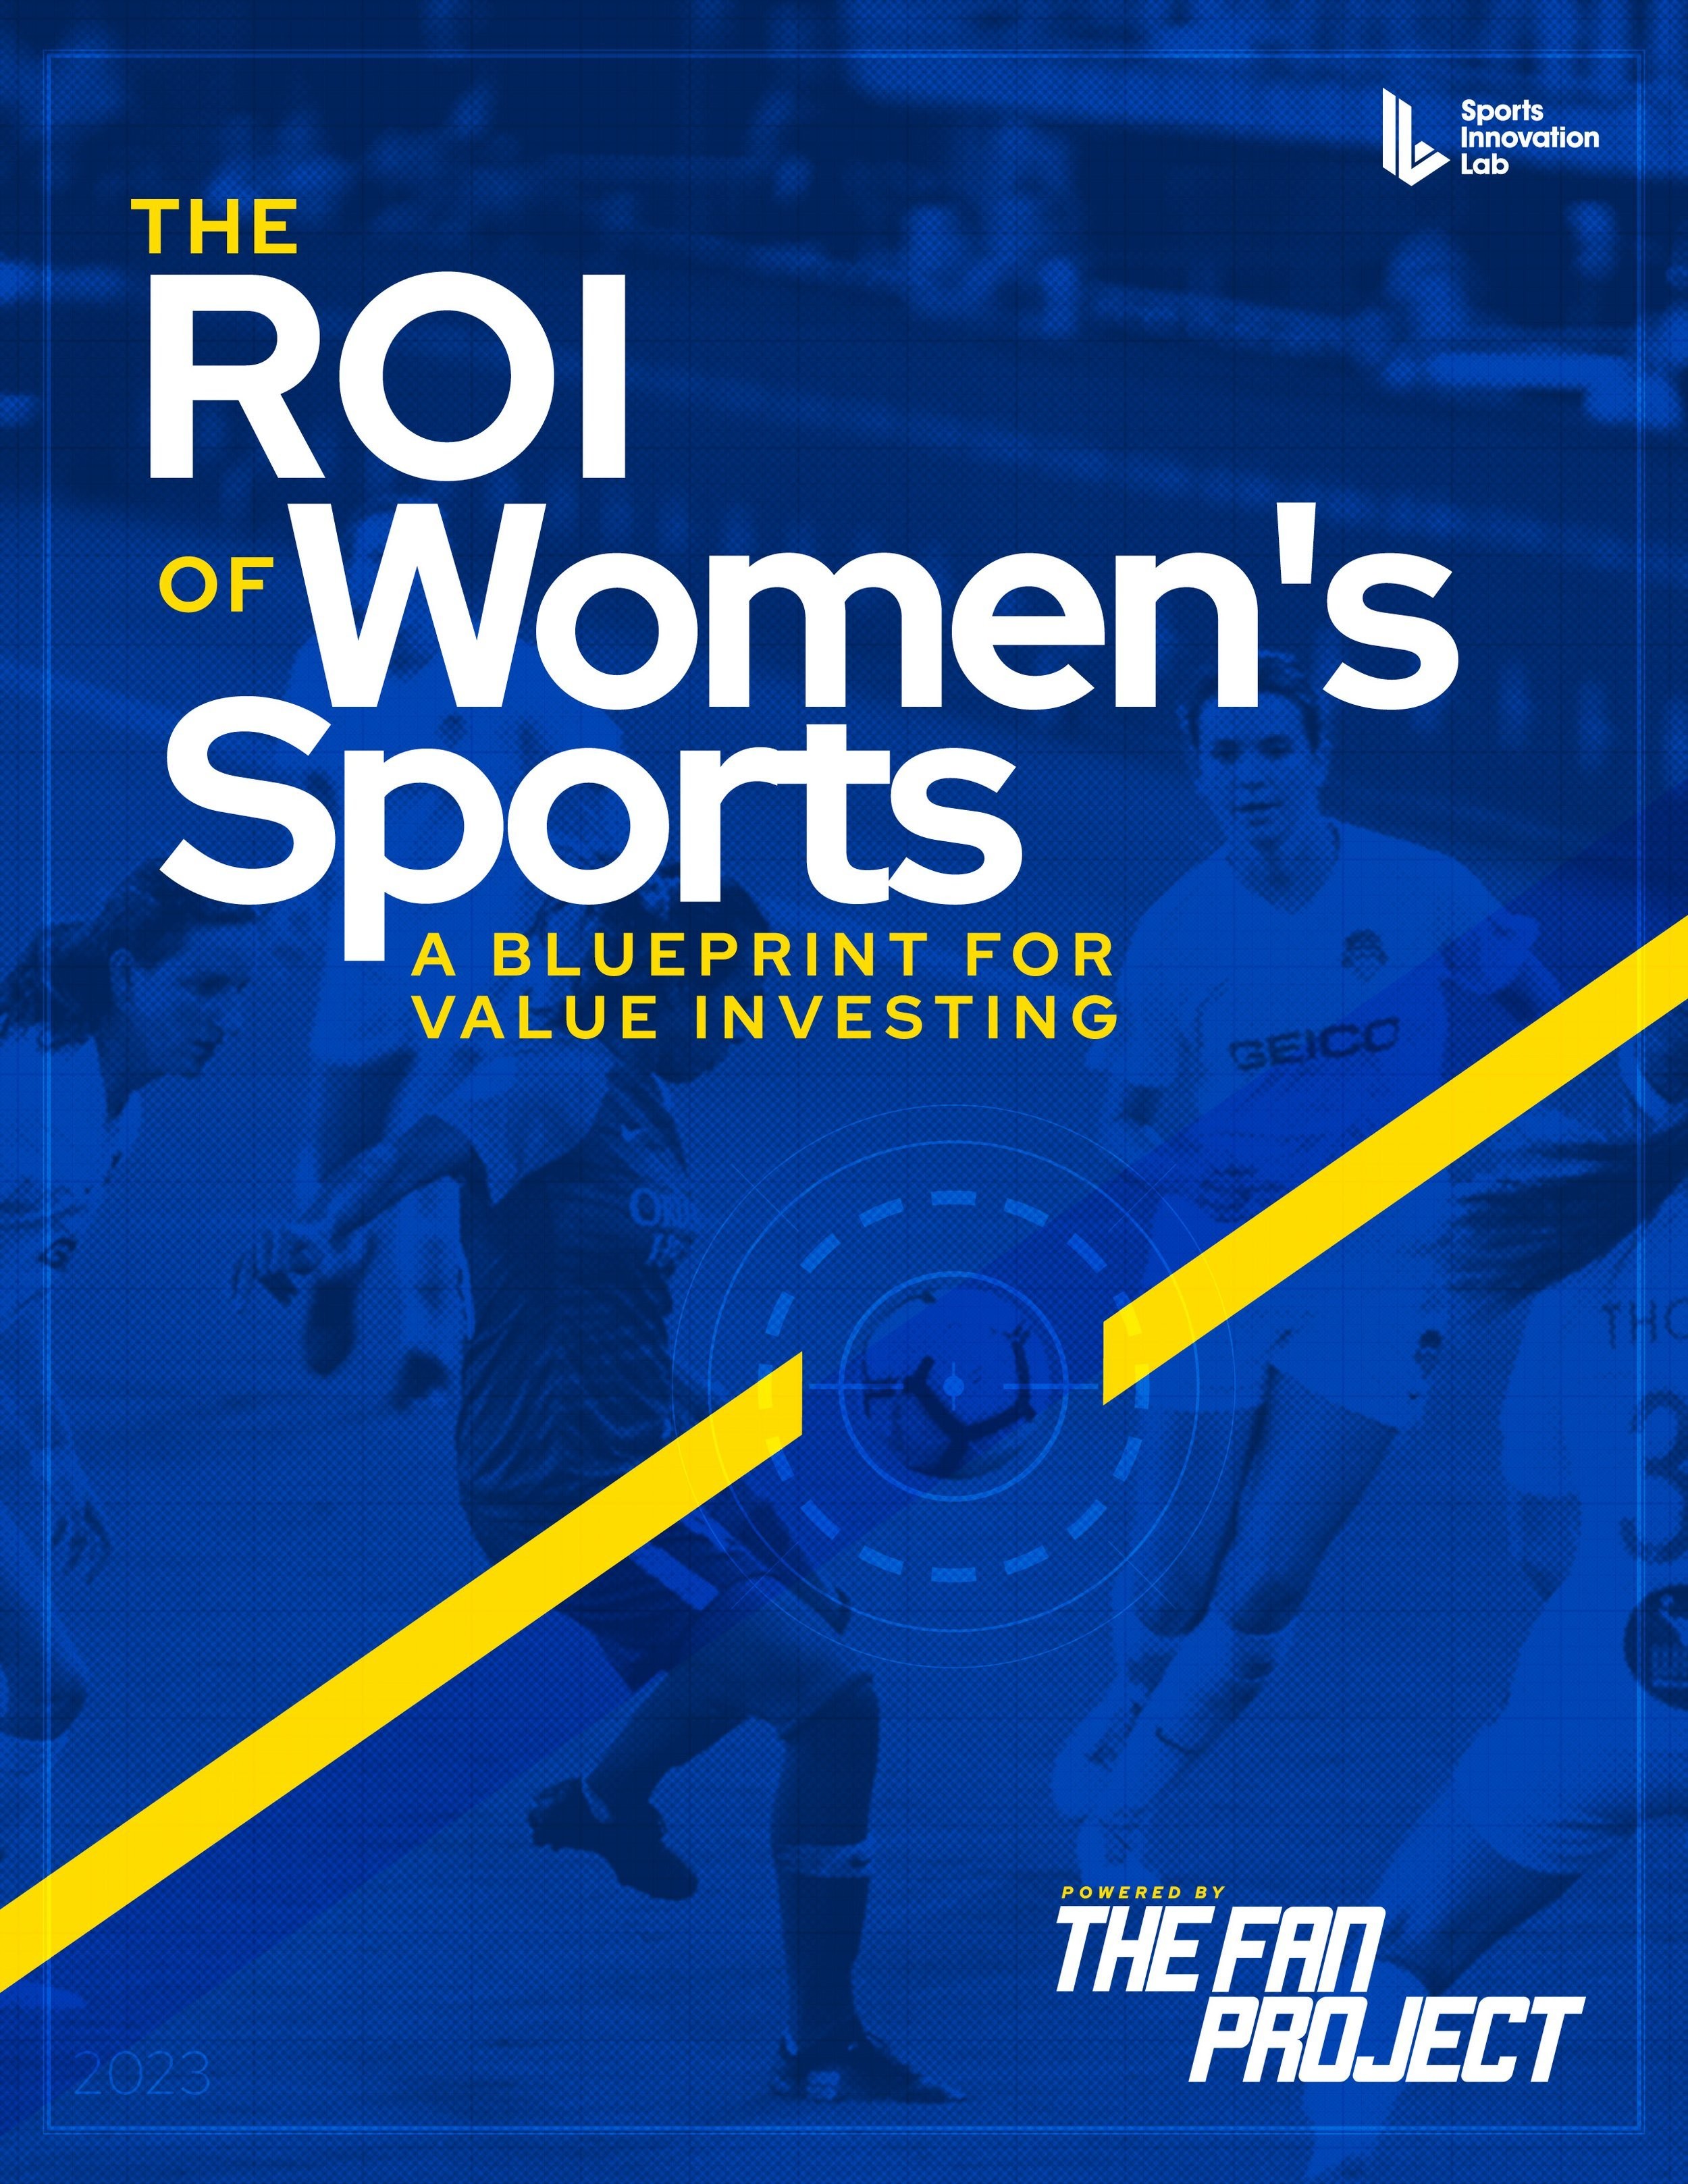 The ROI of Women’s Sports: A Blueprint for Value Investing